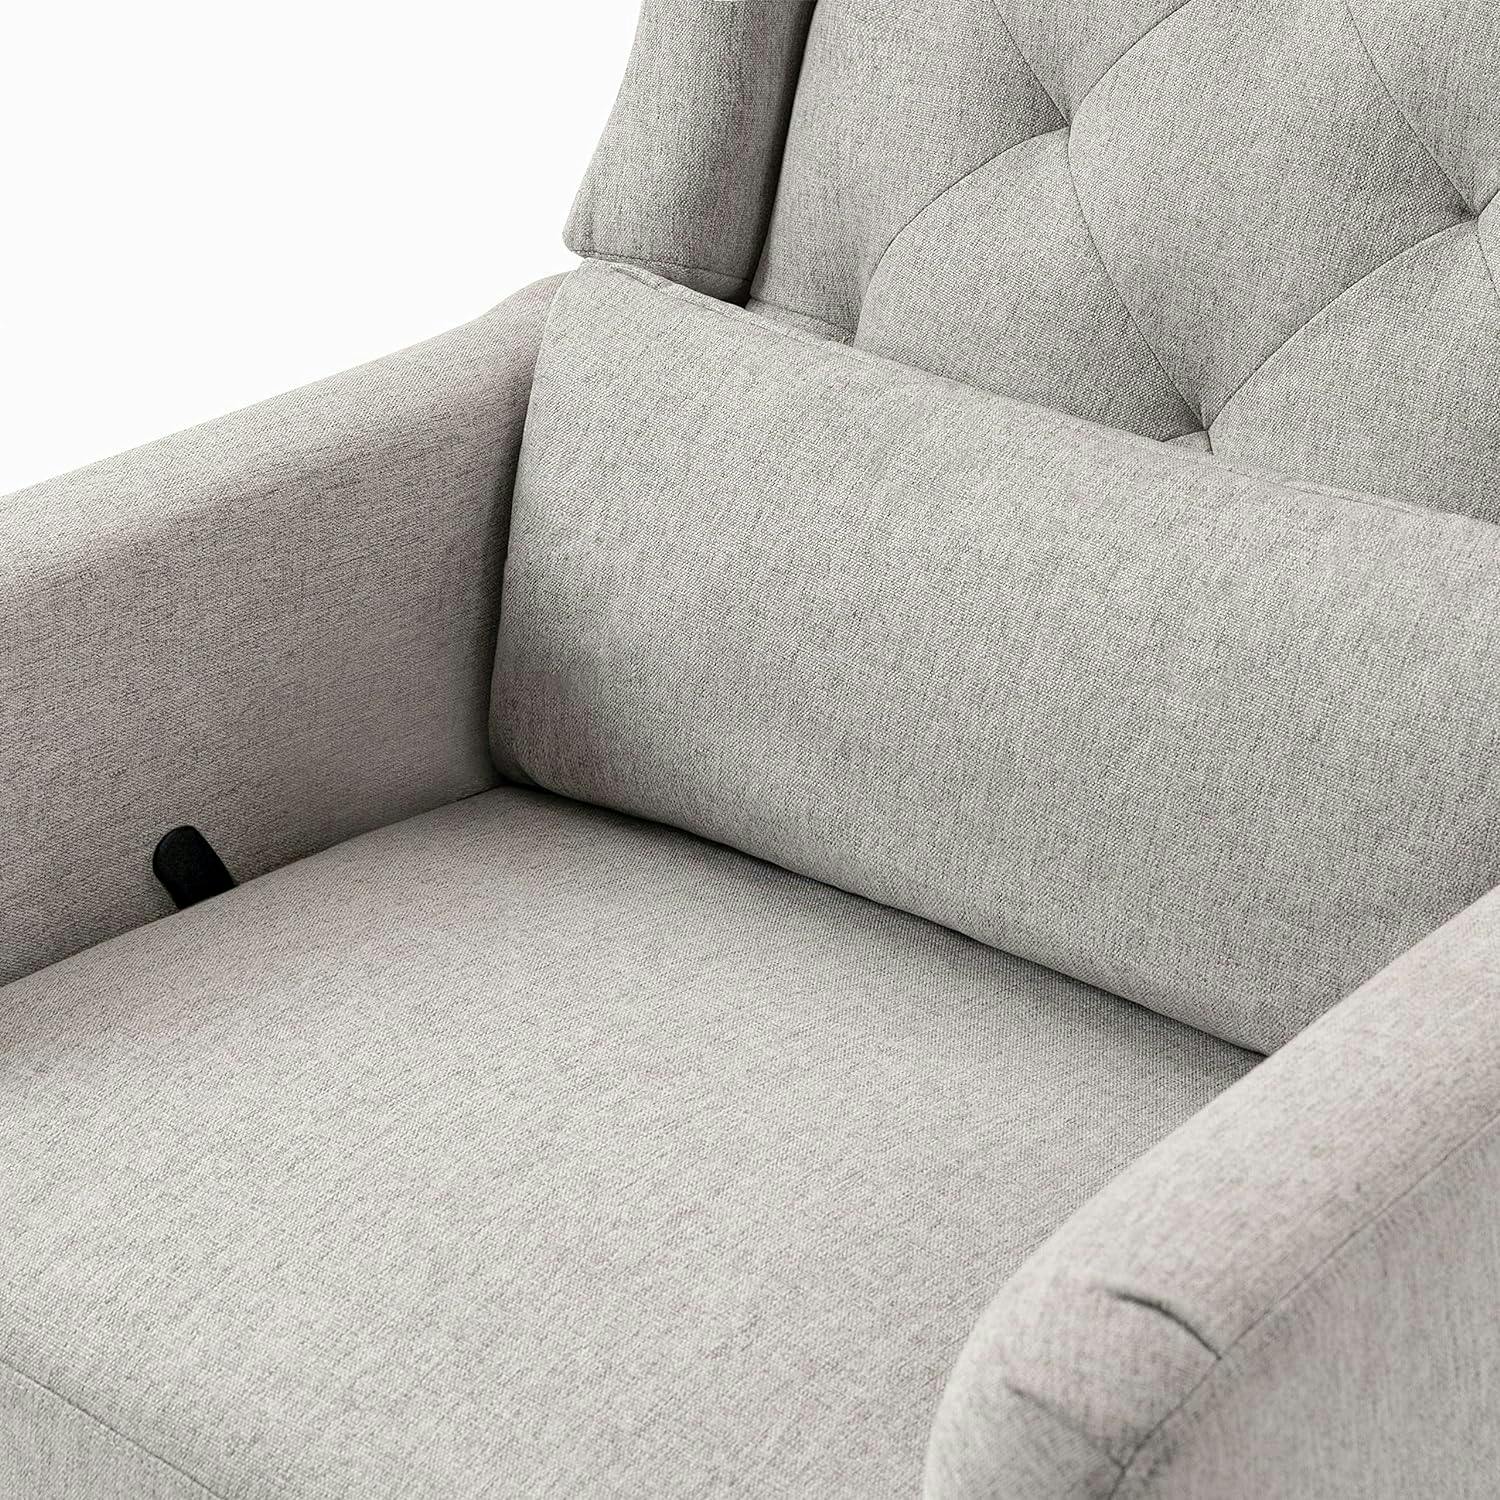 Everly Swivel Reclining Glider in Performance Gray Eco-Weave